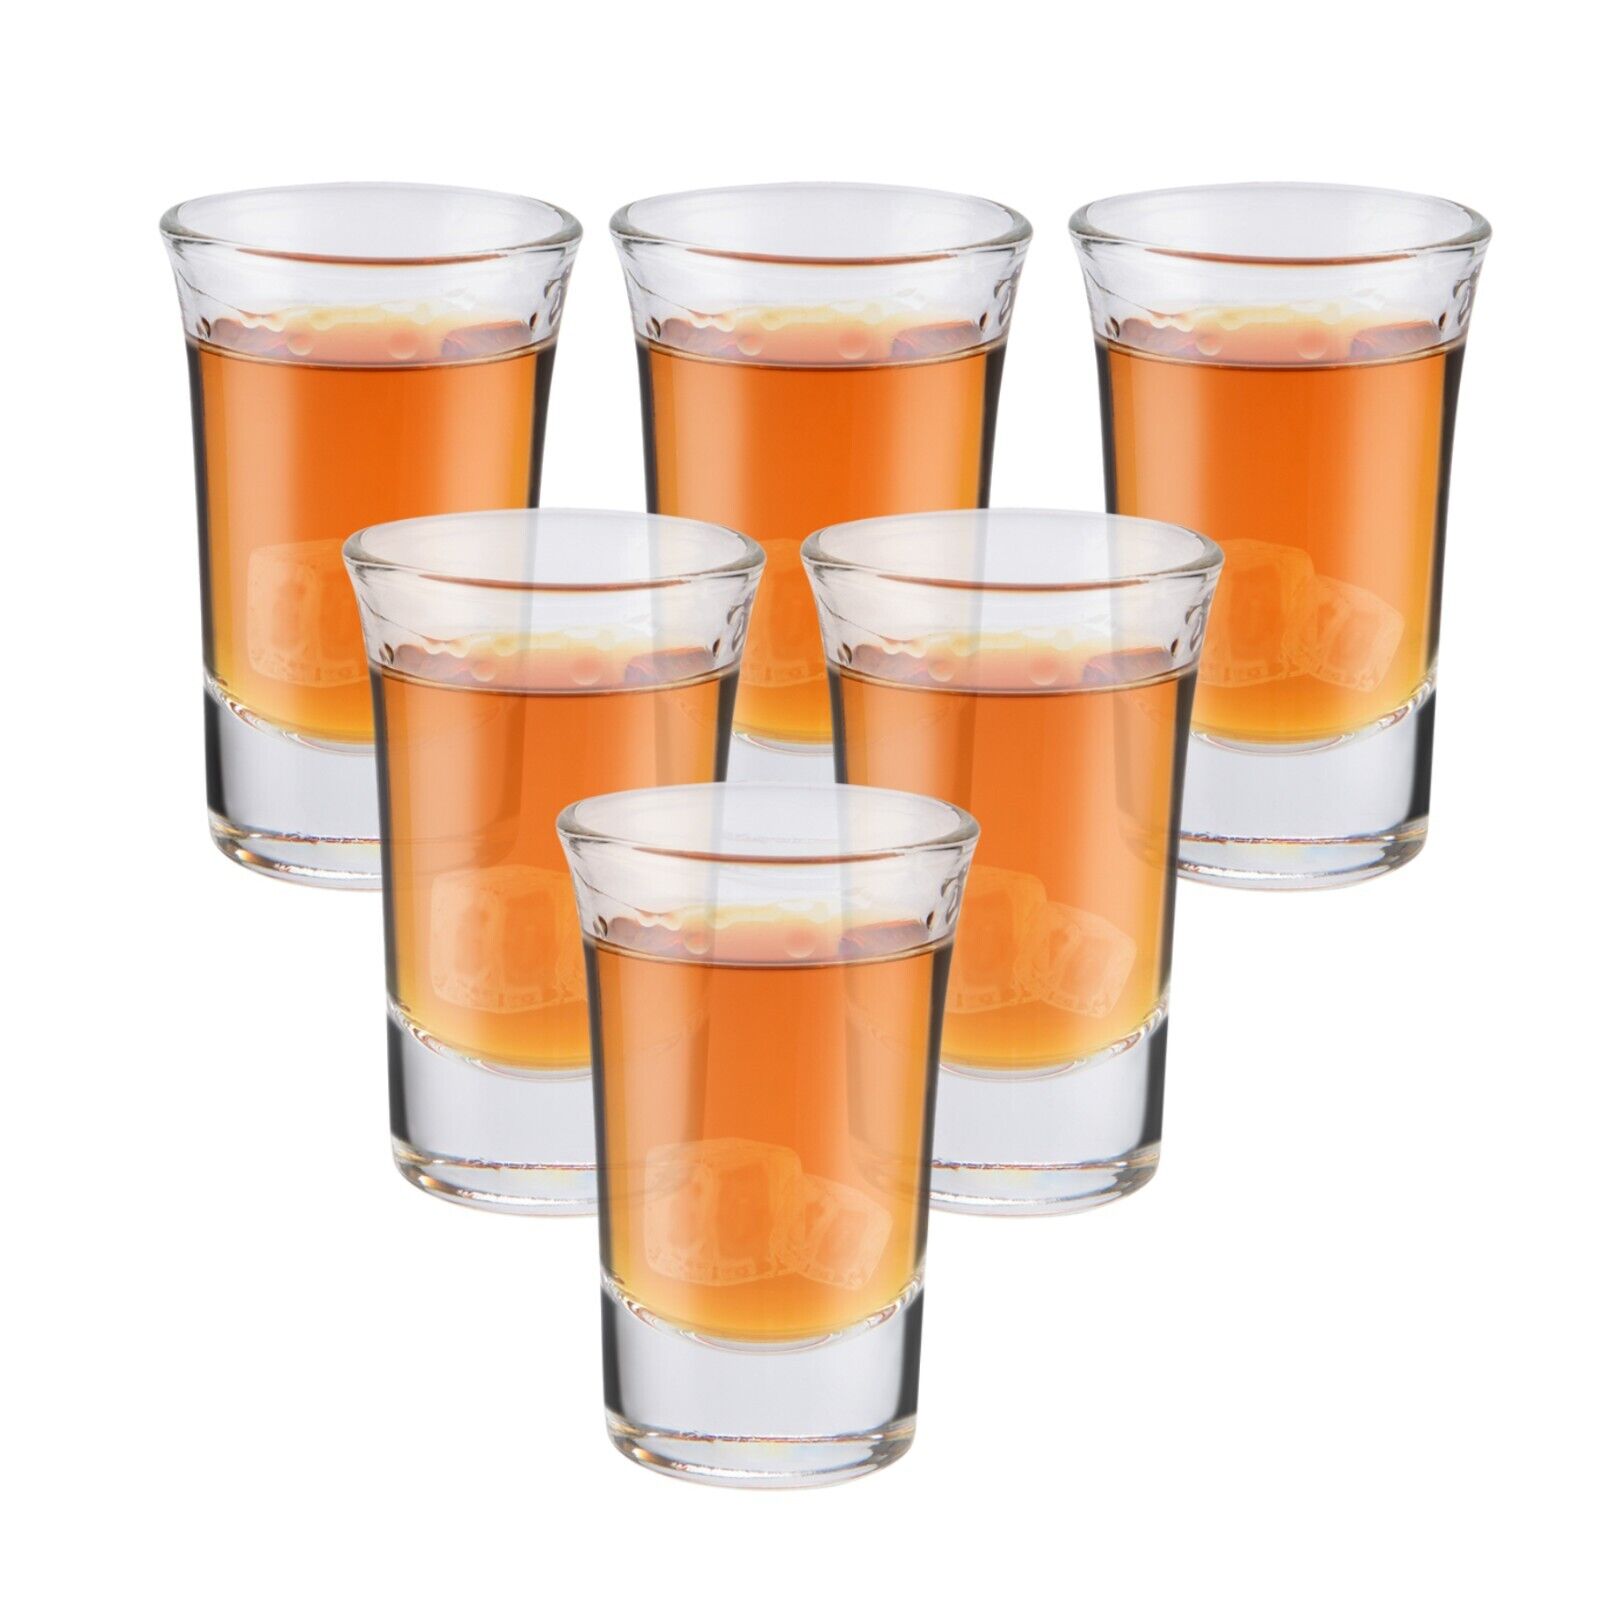 6 Personalized Shot Glasses - Weddings/ Special Occasions -Free Custom Engraving